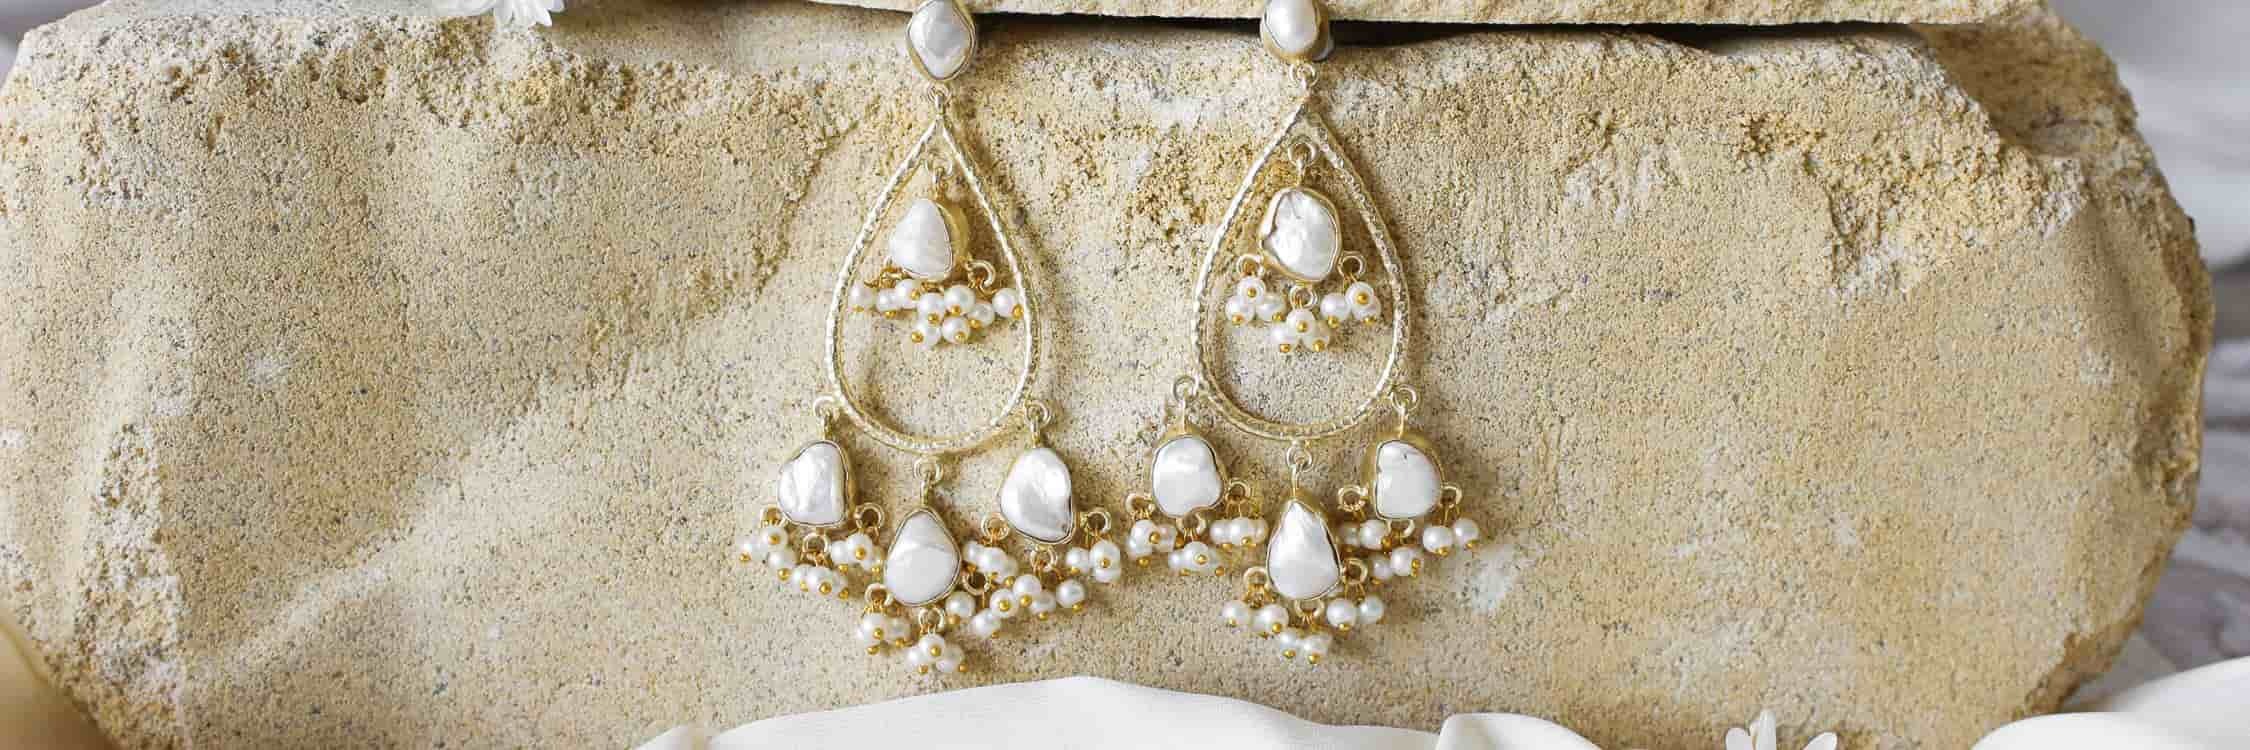 Luv Bridal Los Angeles collections accessories